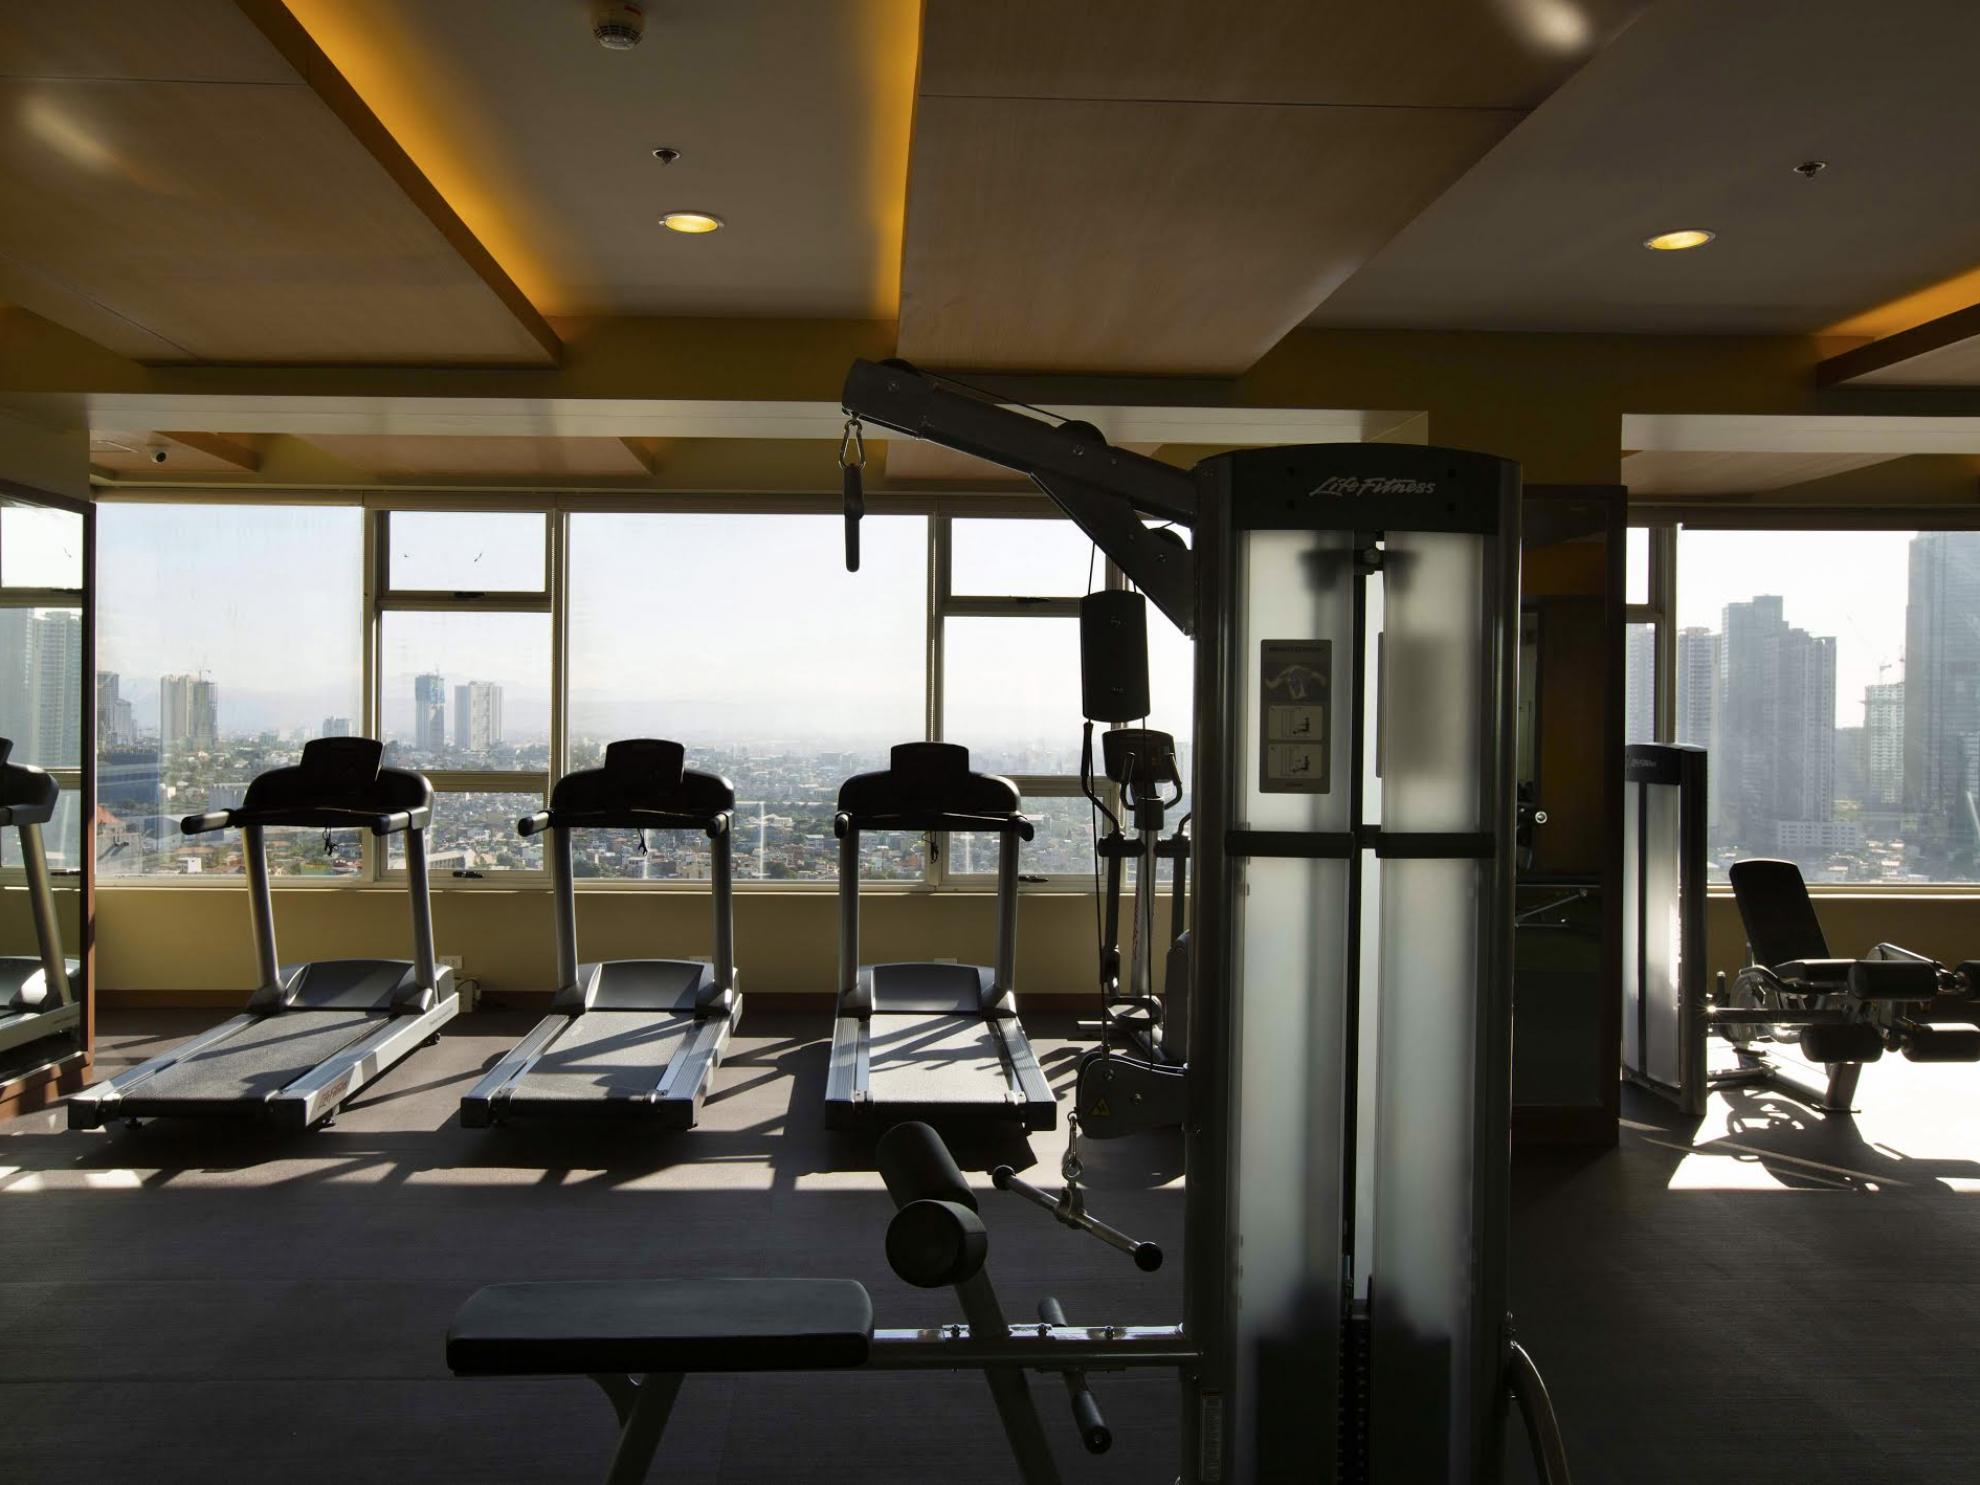 Brio Tower’s fitness gym offers a breathtaking view of the Ortigas-Mandaluyong skyline.